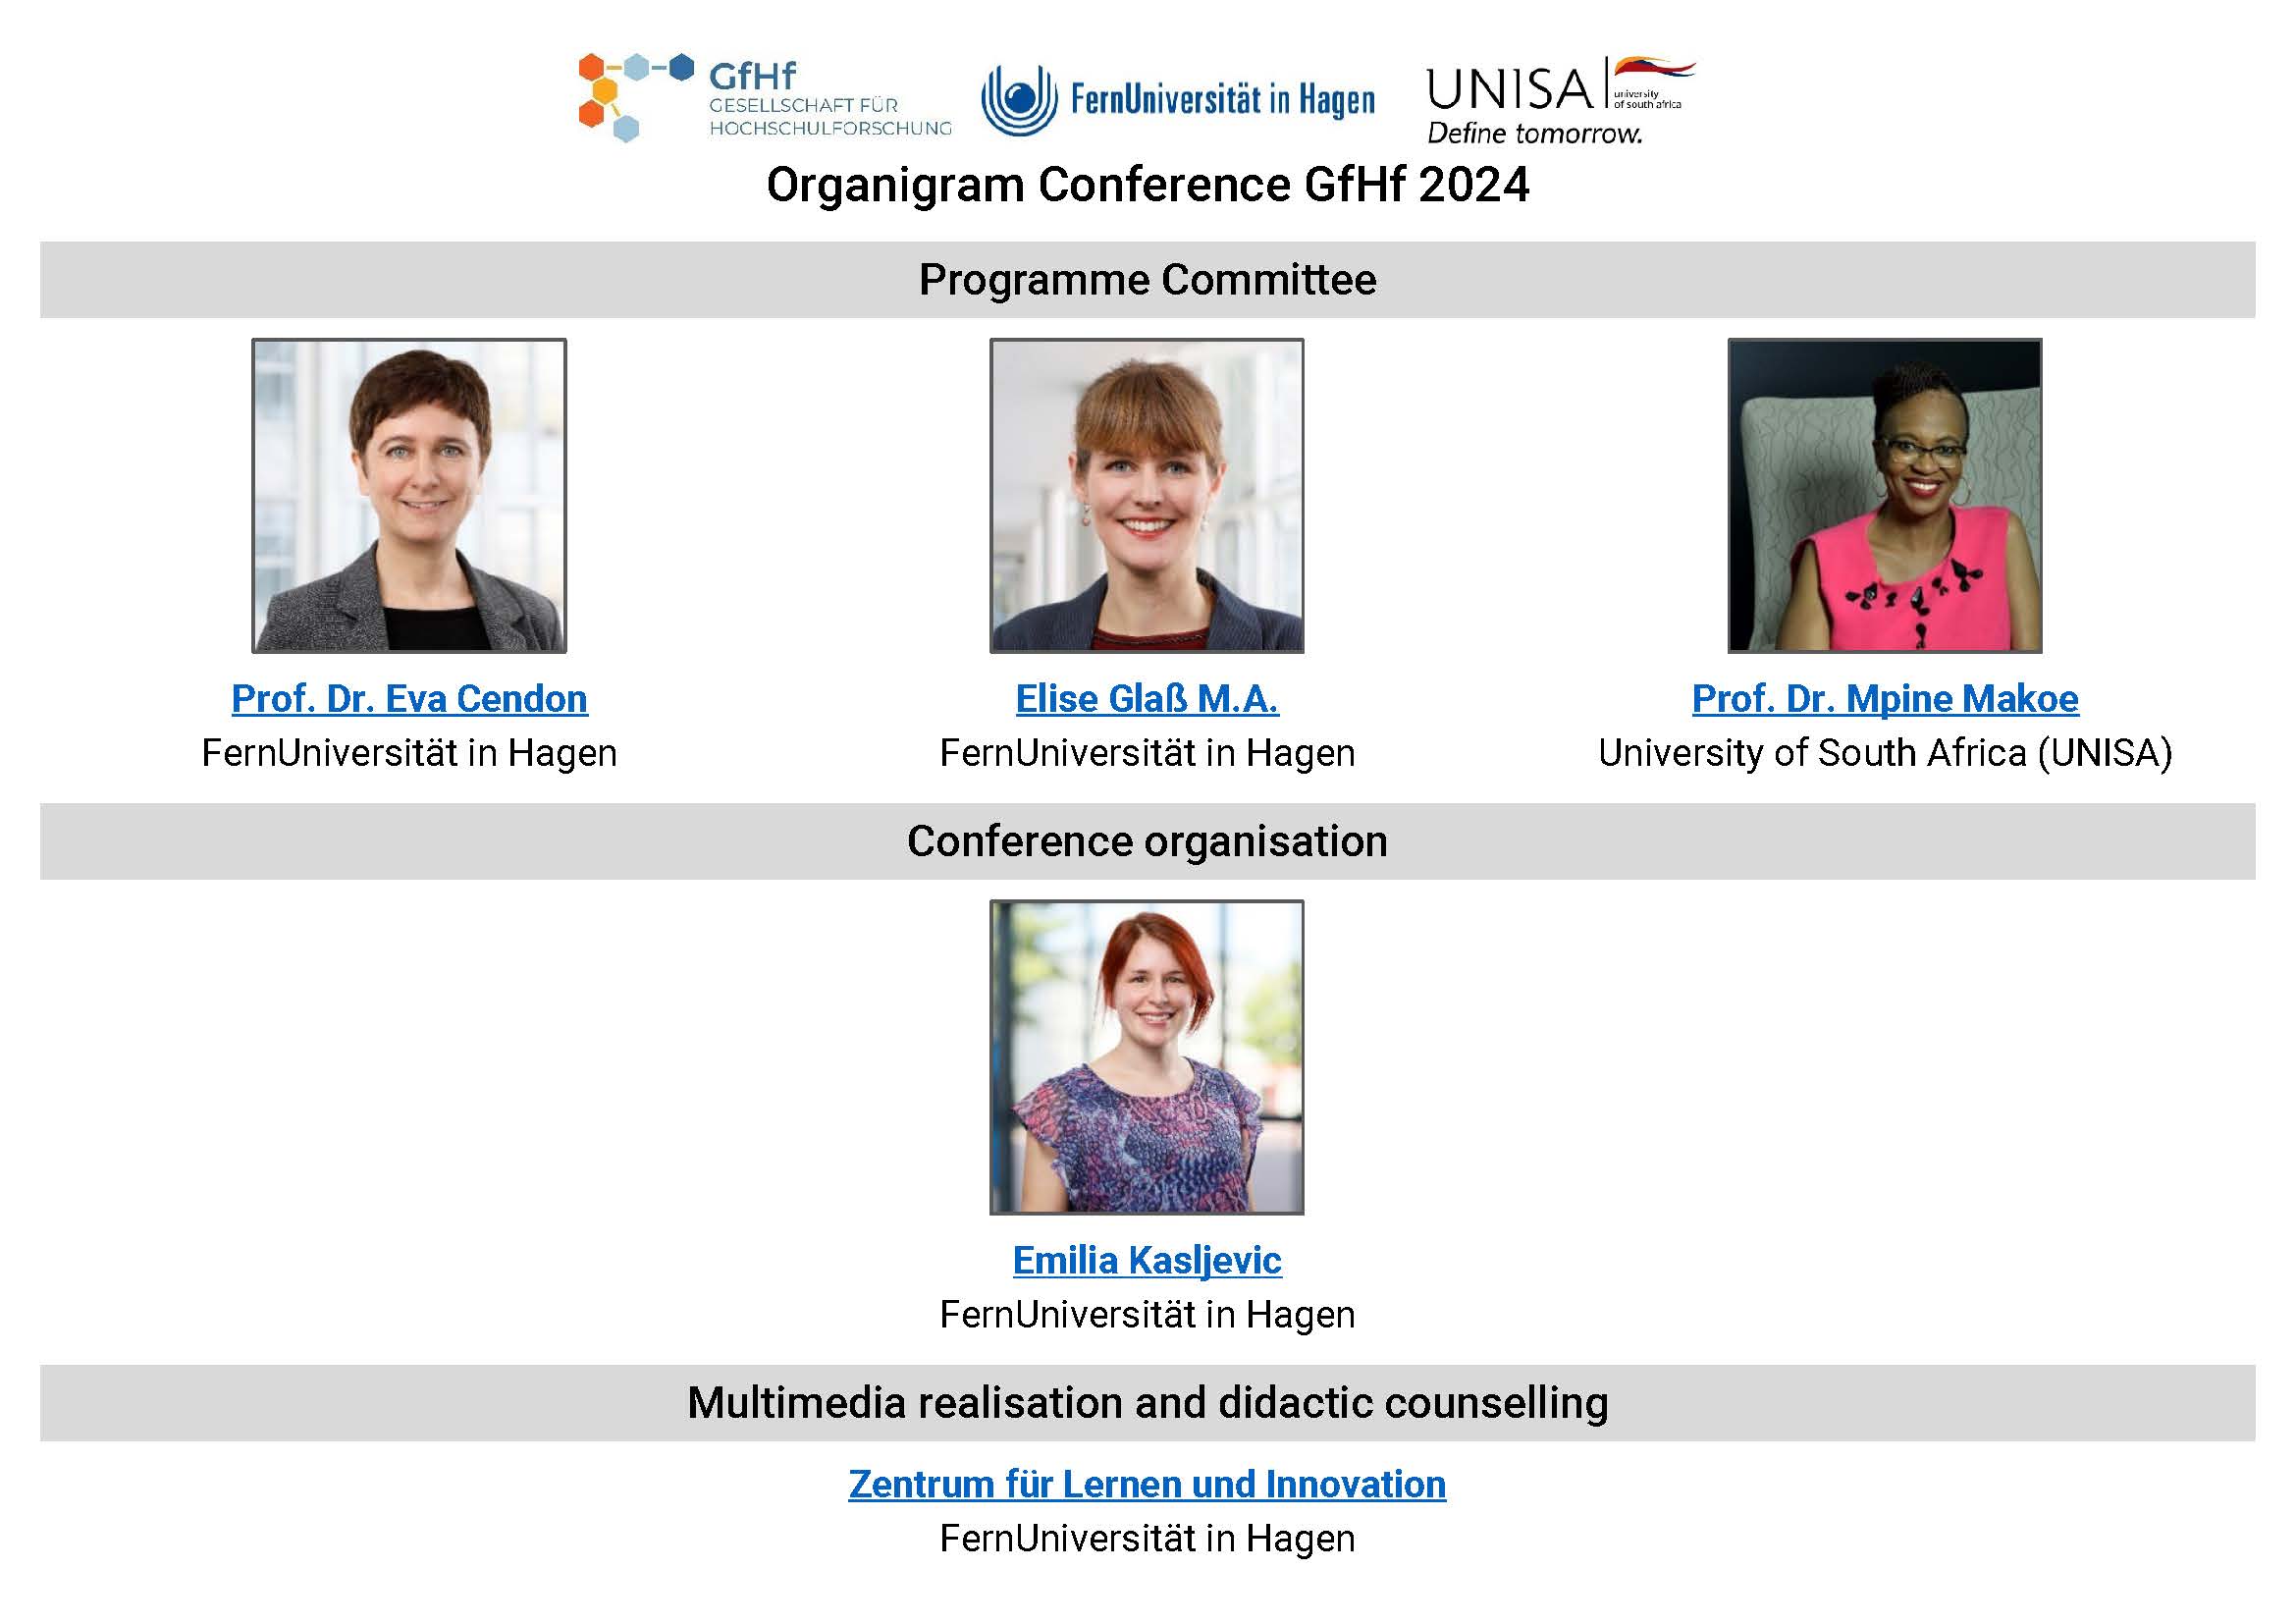 The GfHf Conference 2024 will be led by the programme committee, consisting of Eva Cendon, Elise Glaß and Mpine Makoe, Emilia Kasljevic will organise the conference, and the Centre for Learning and Innovation at FernUni Hagen will provide multimedia support and didactic advice.